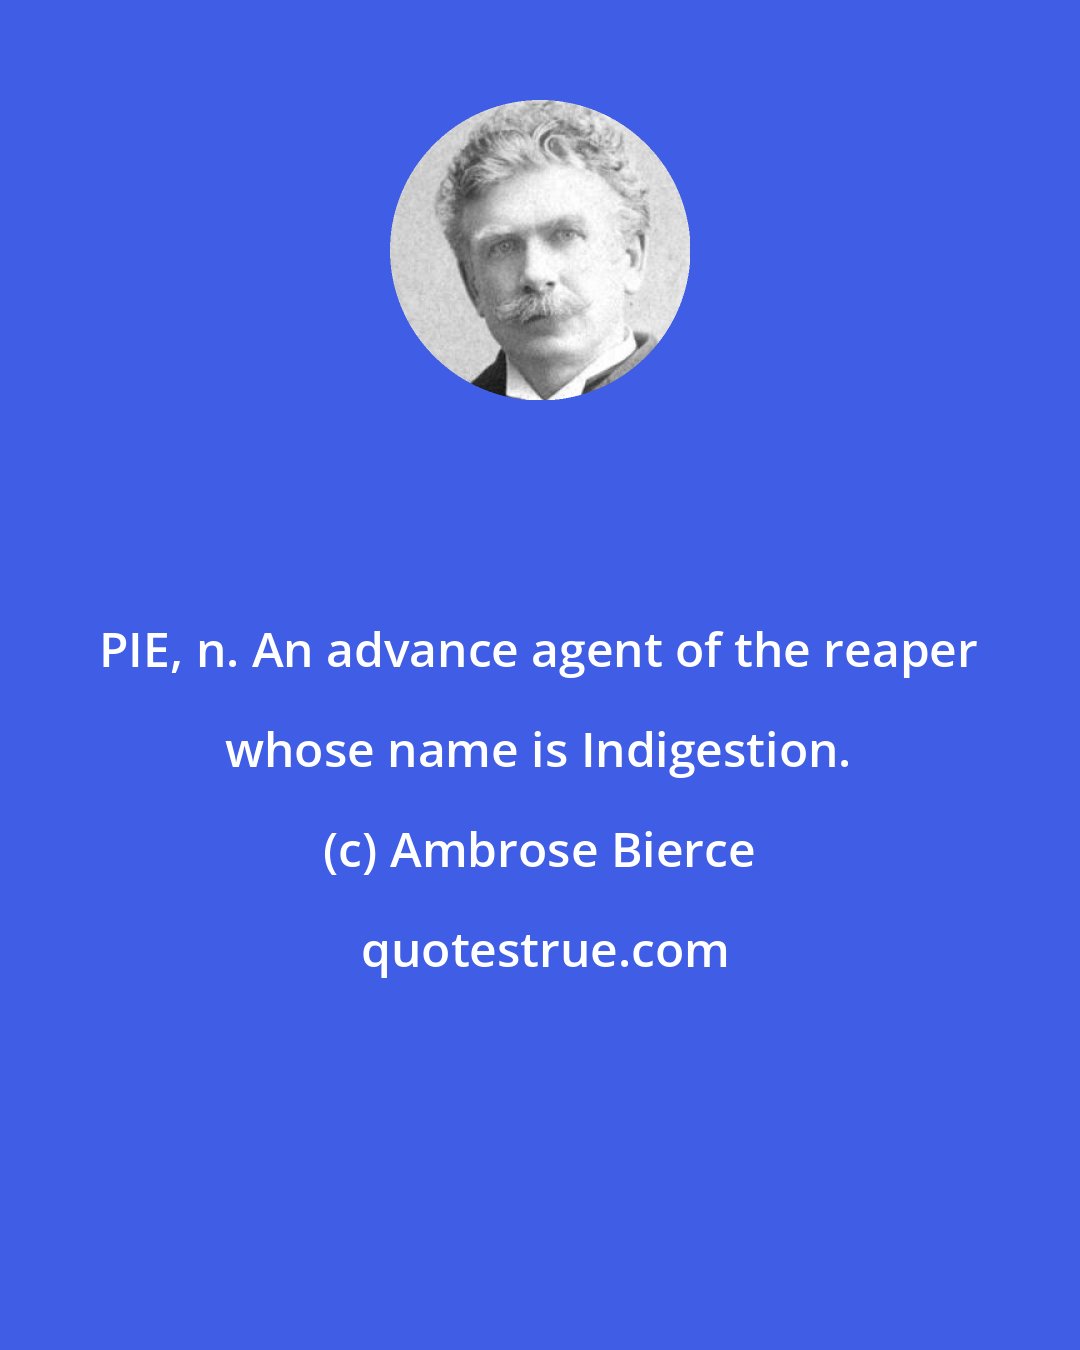 Ambrose Bierce: PIE, n. An advance agent of the reaper whose name is Indigestion.